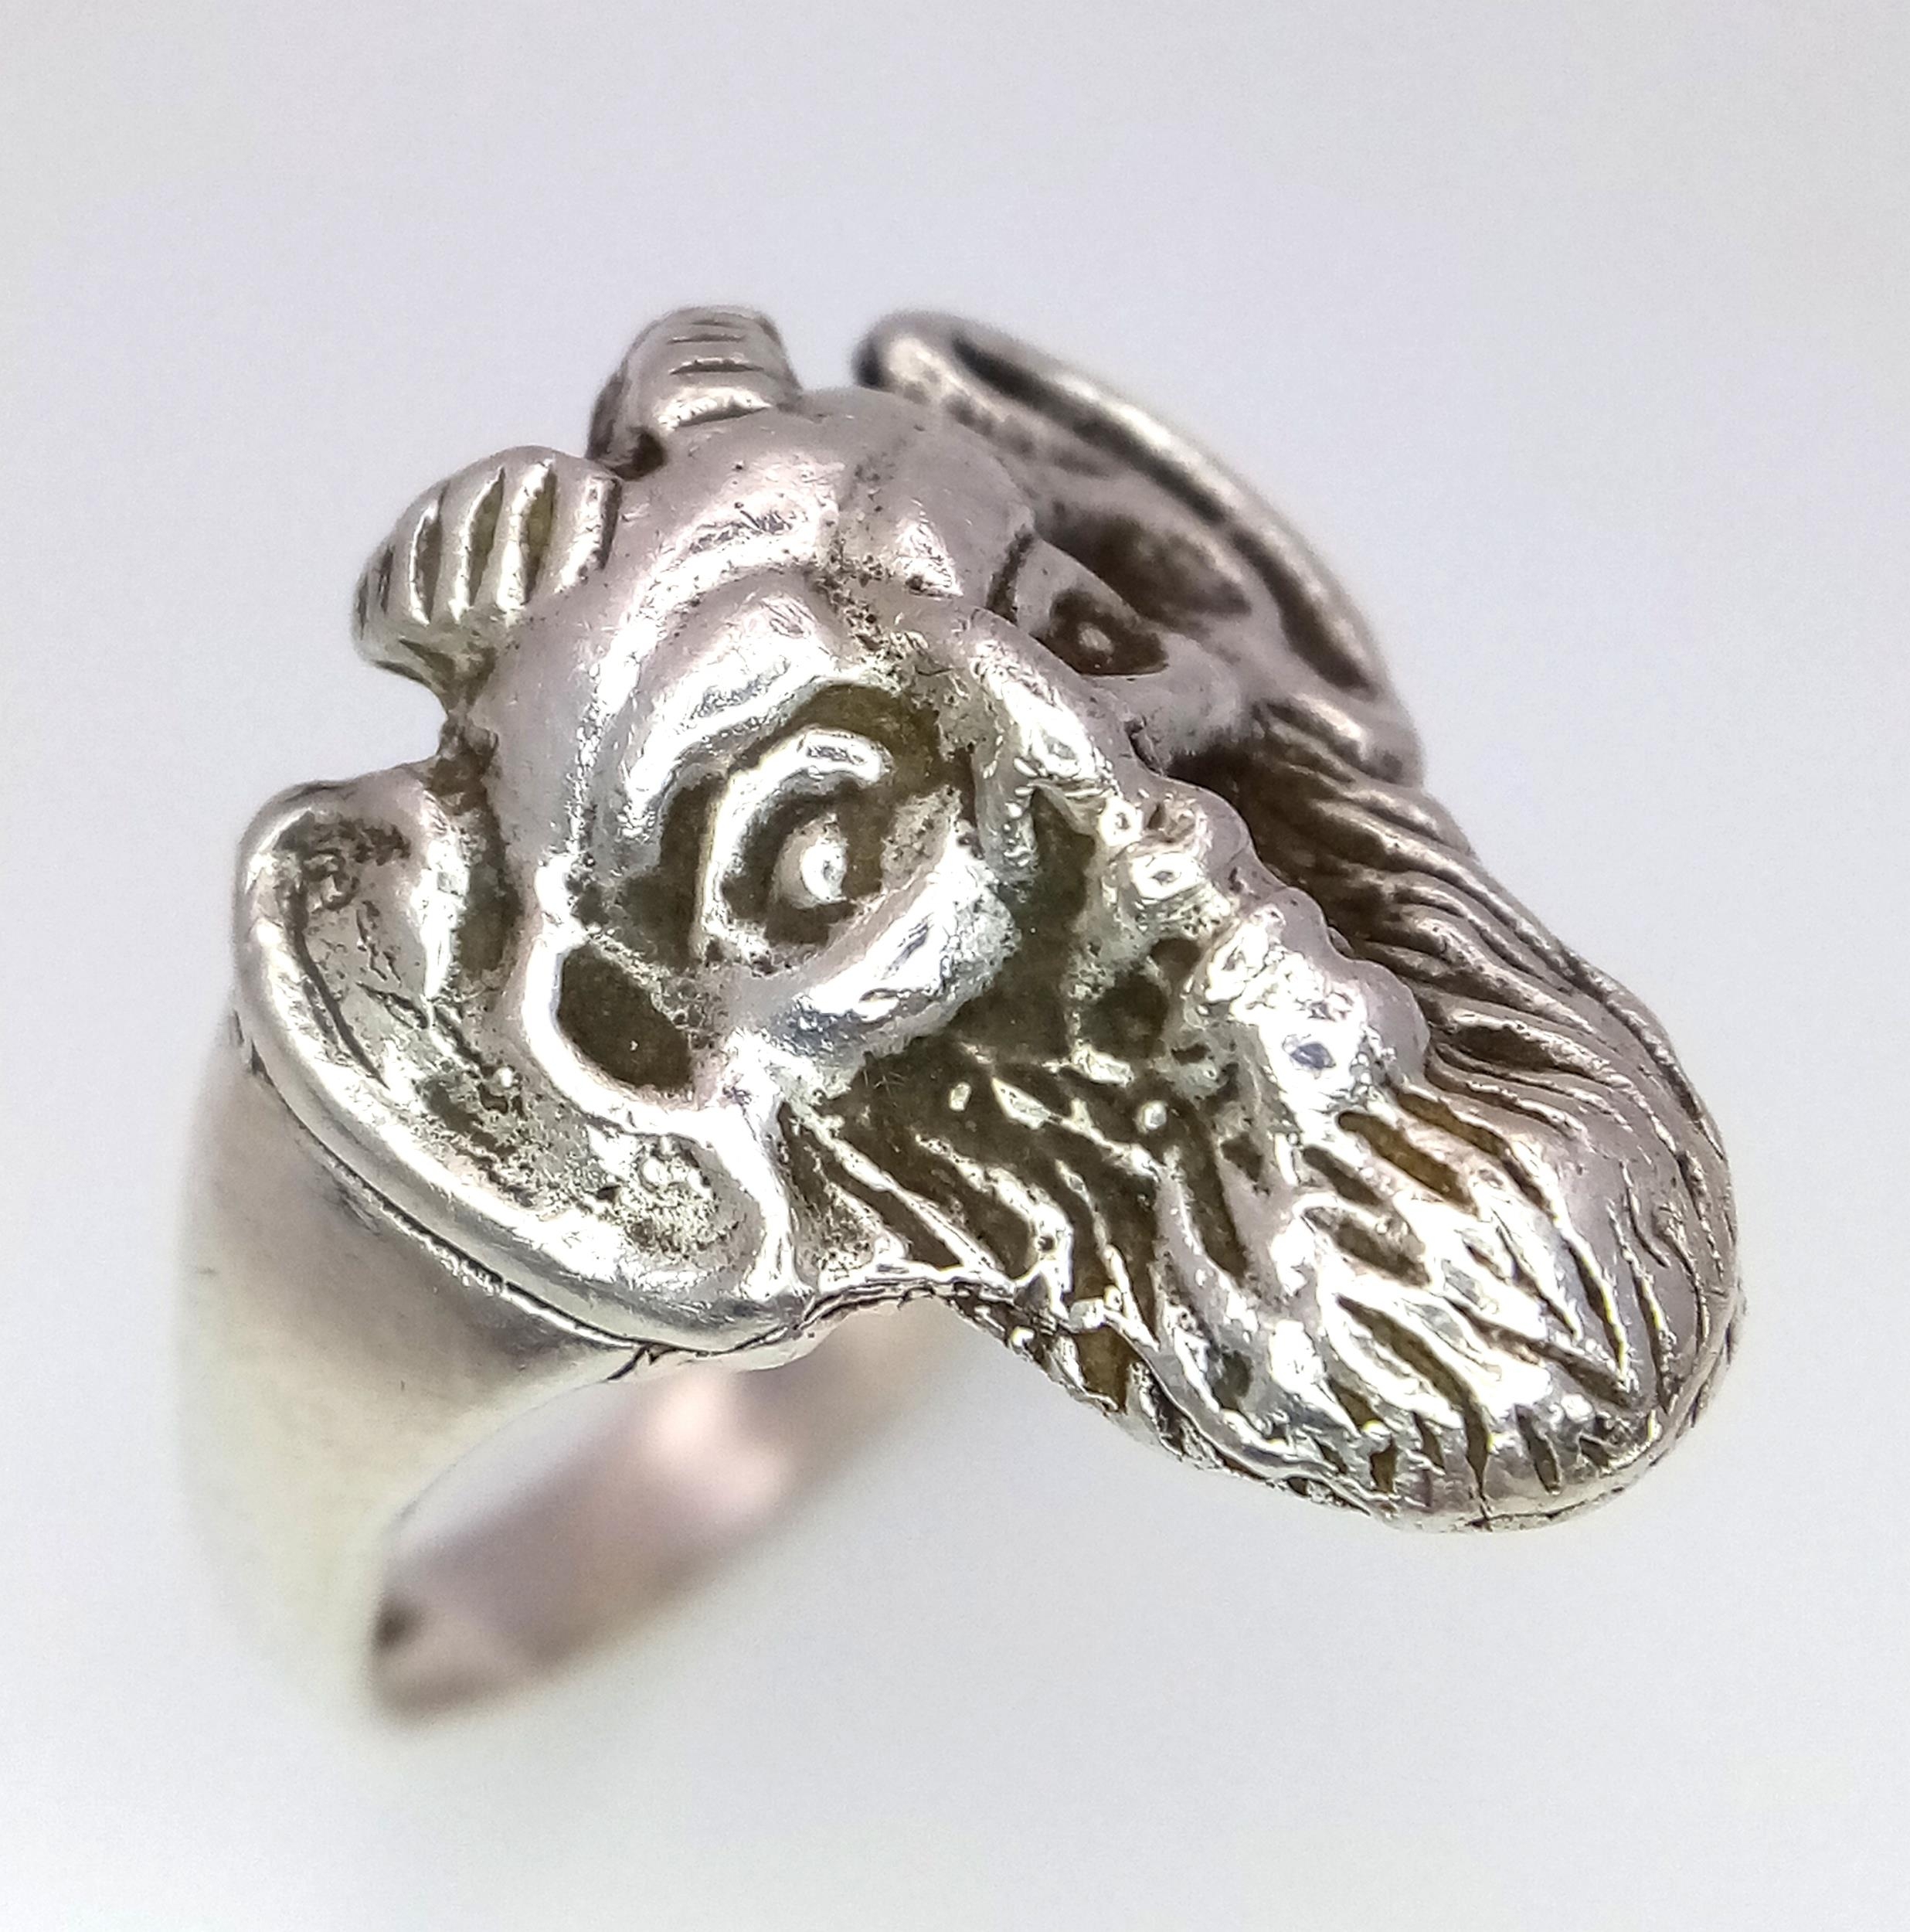 A Very Unique, Vintage or Older, Hand Crafted Grotesque Design Silver Ring Size T. Crown measures - Image 2 of 5